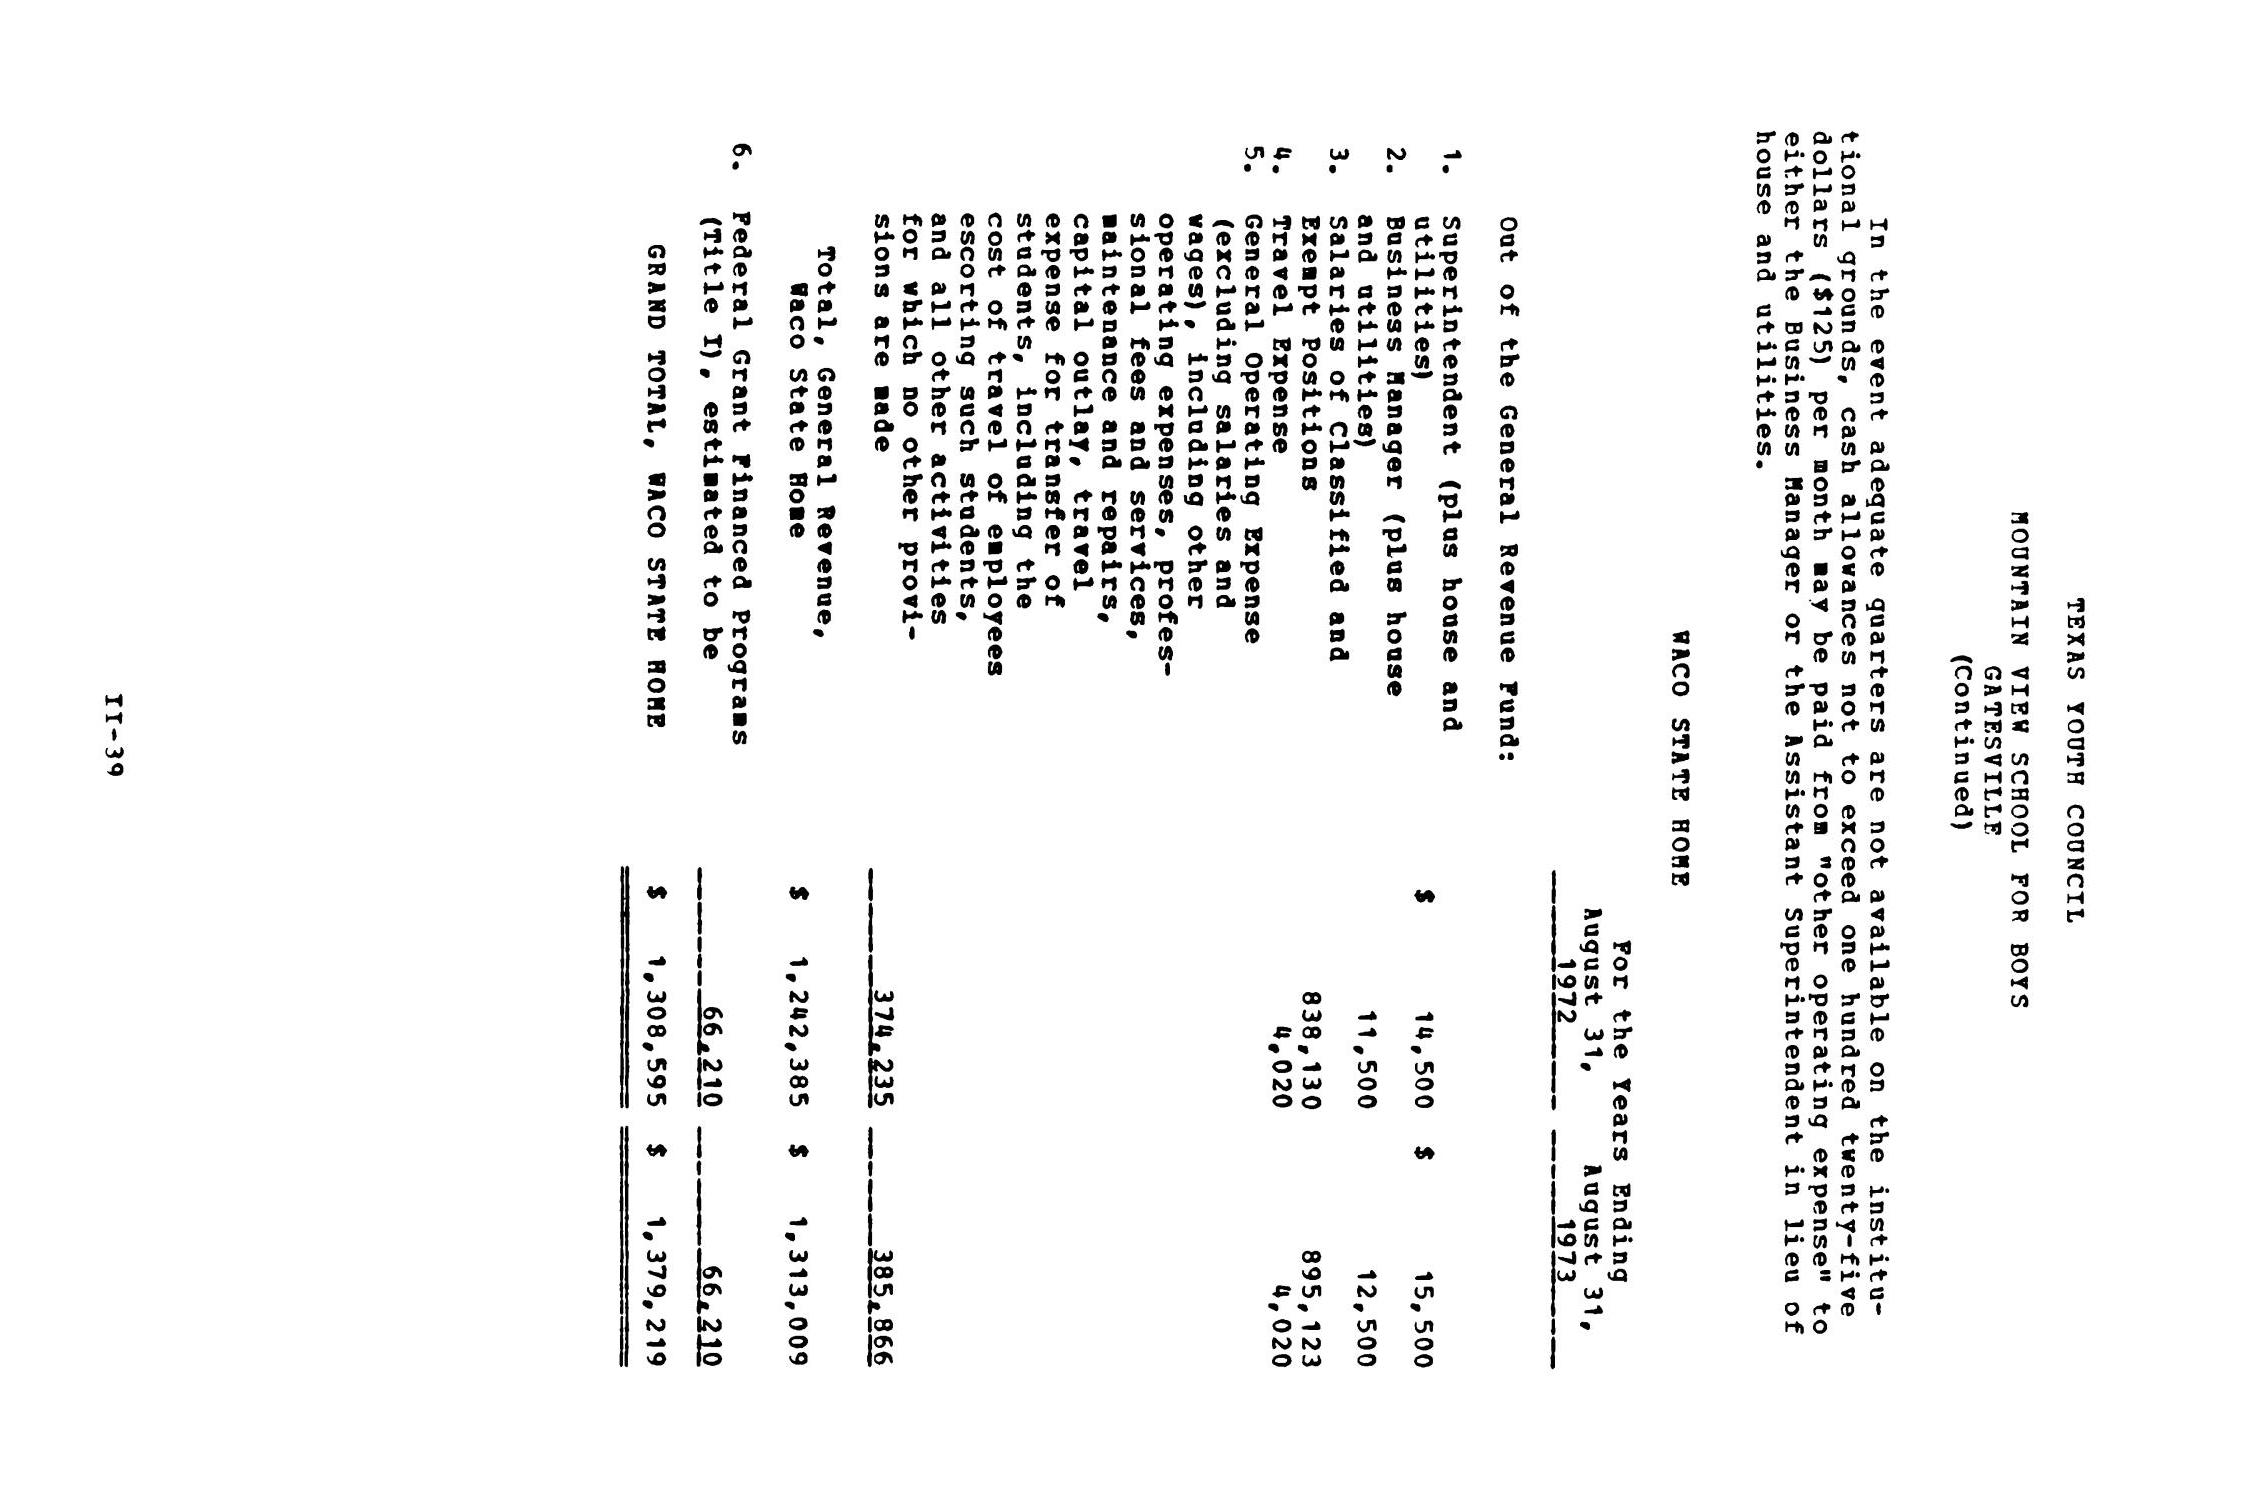 Journal Supplement, Text of Senate Bill No. 11, Regular Session as Amended by Senate Bill No. 7, First Called Session, Sixty-Second Legislature, State of Texas, 1971
                                                
                                                    39
                                                